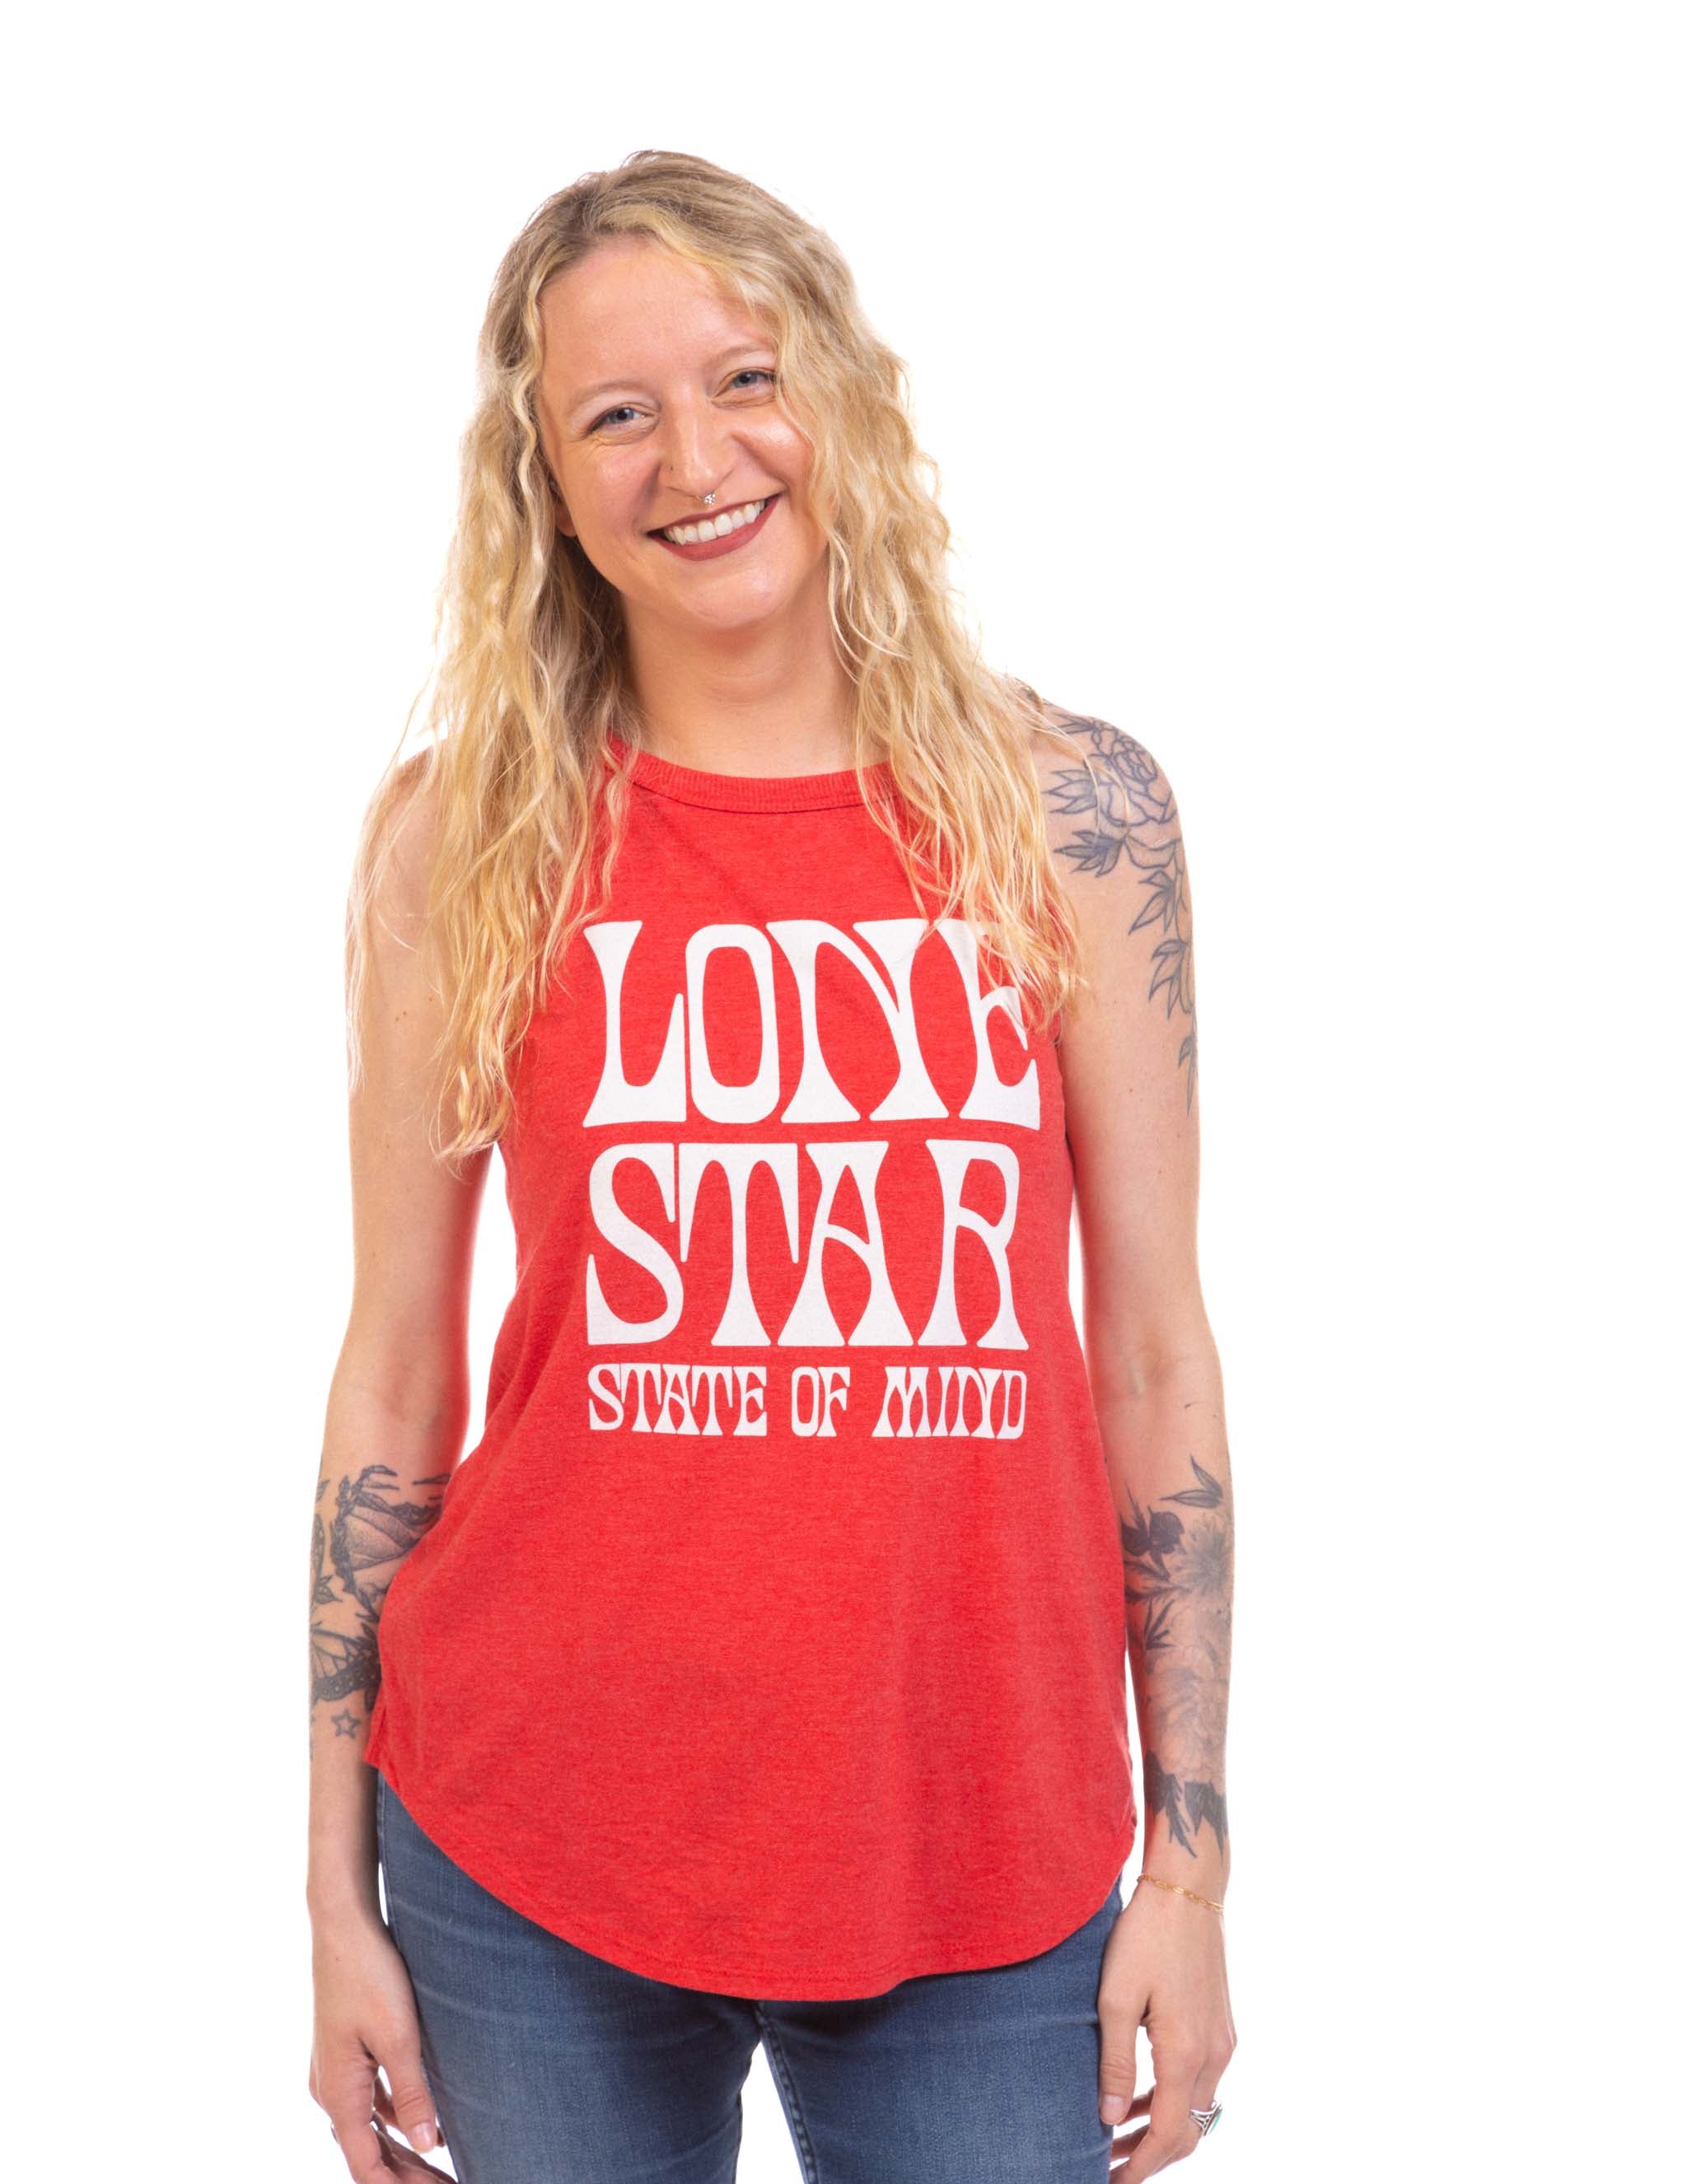 Texas Lone Star State of Mind Tank